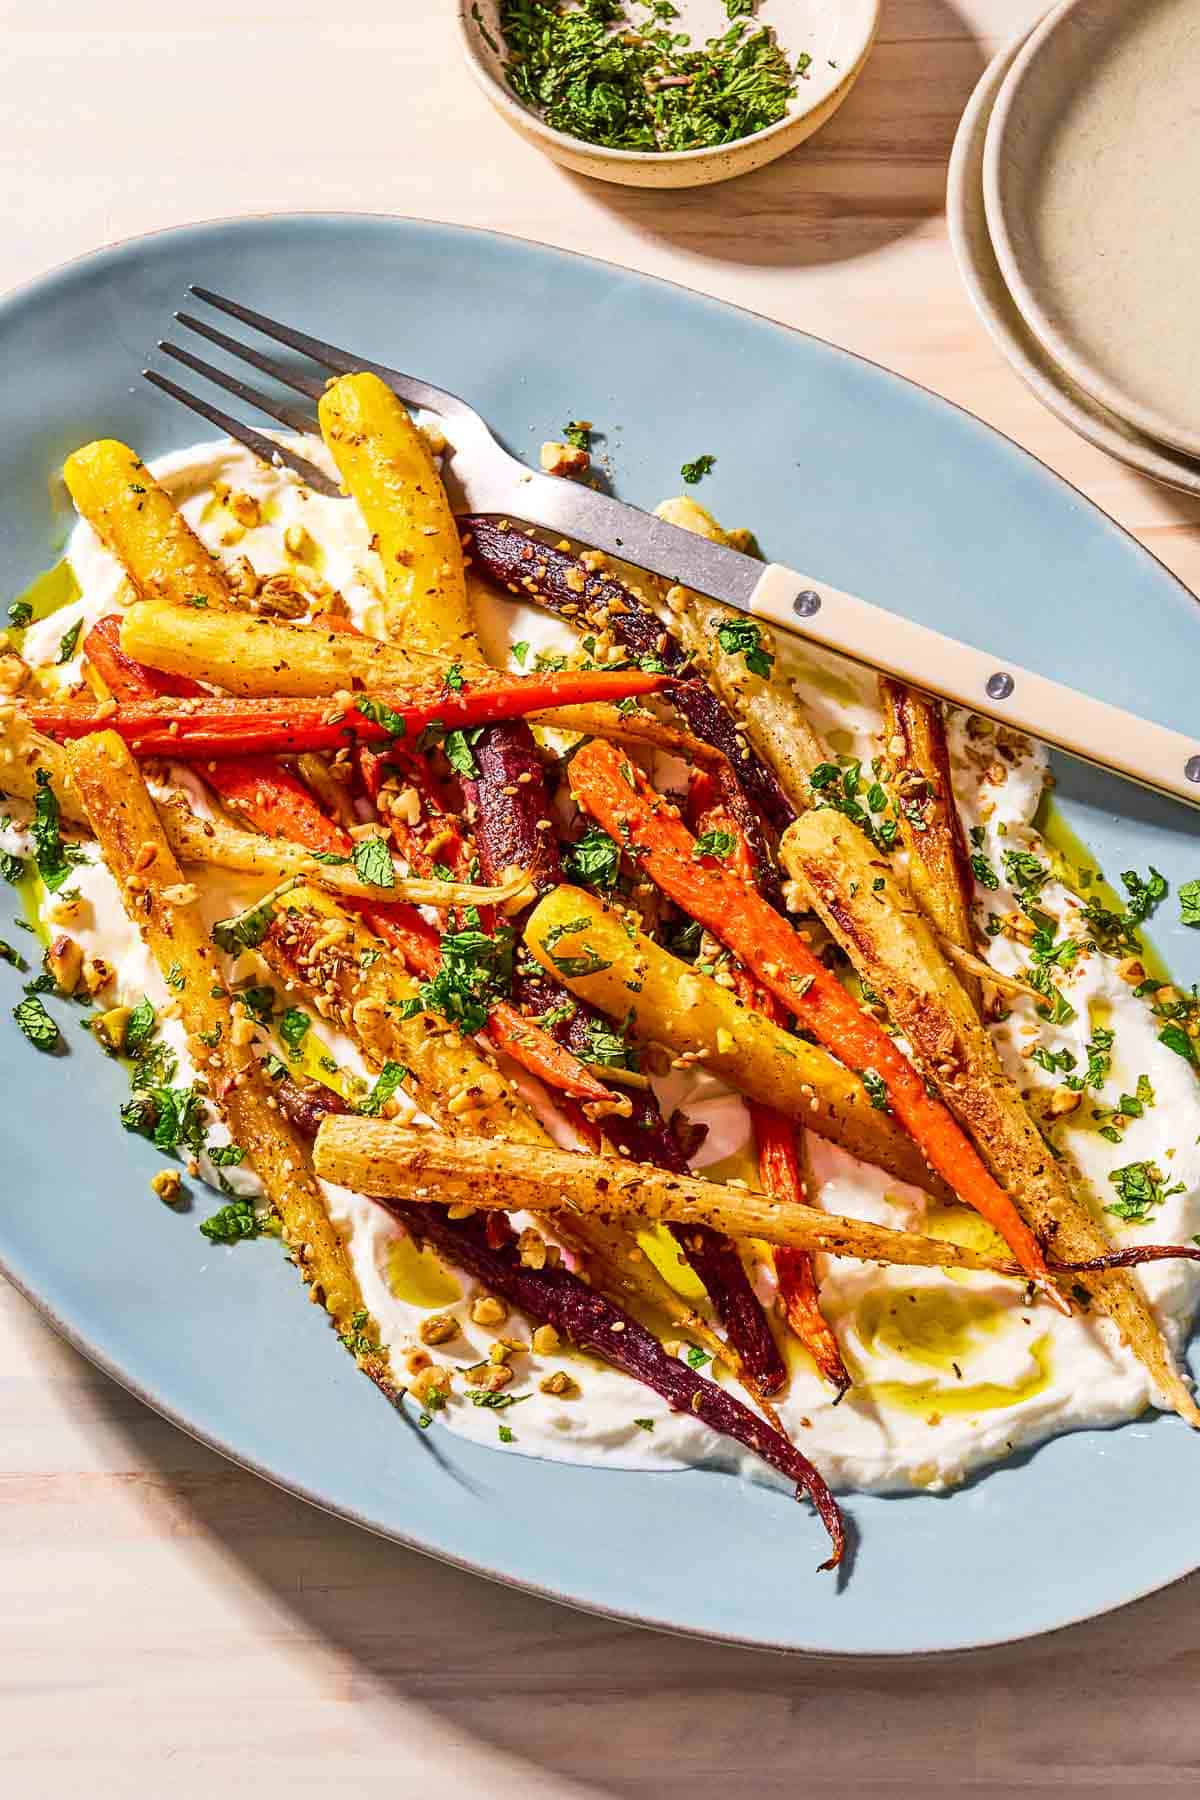 Roasted rainbow carrots with with dukkah, mint and a garlicky yogurt sauce on a serving platter with a fork. Next to this is a small bowl with chopped mint and a stack of 2 plates.